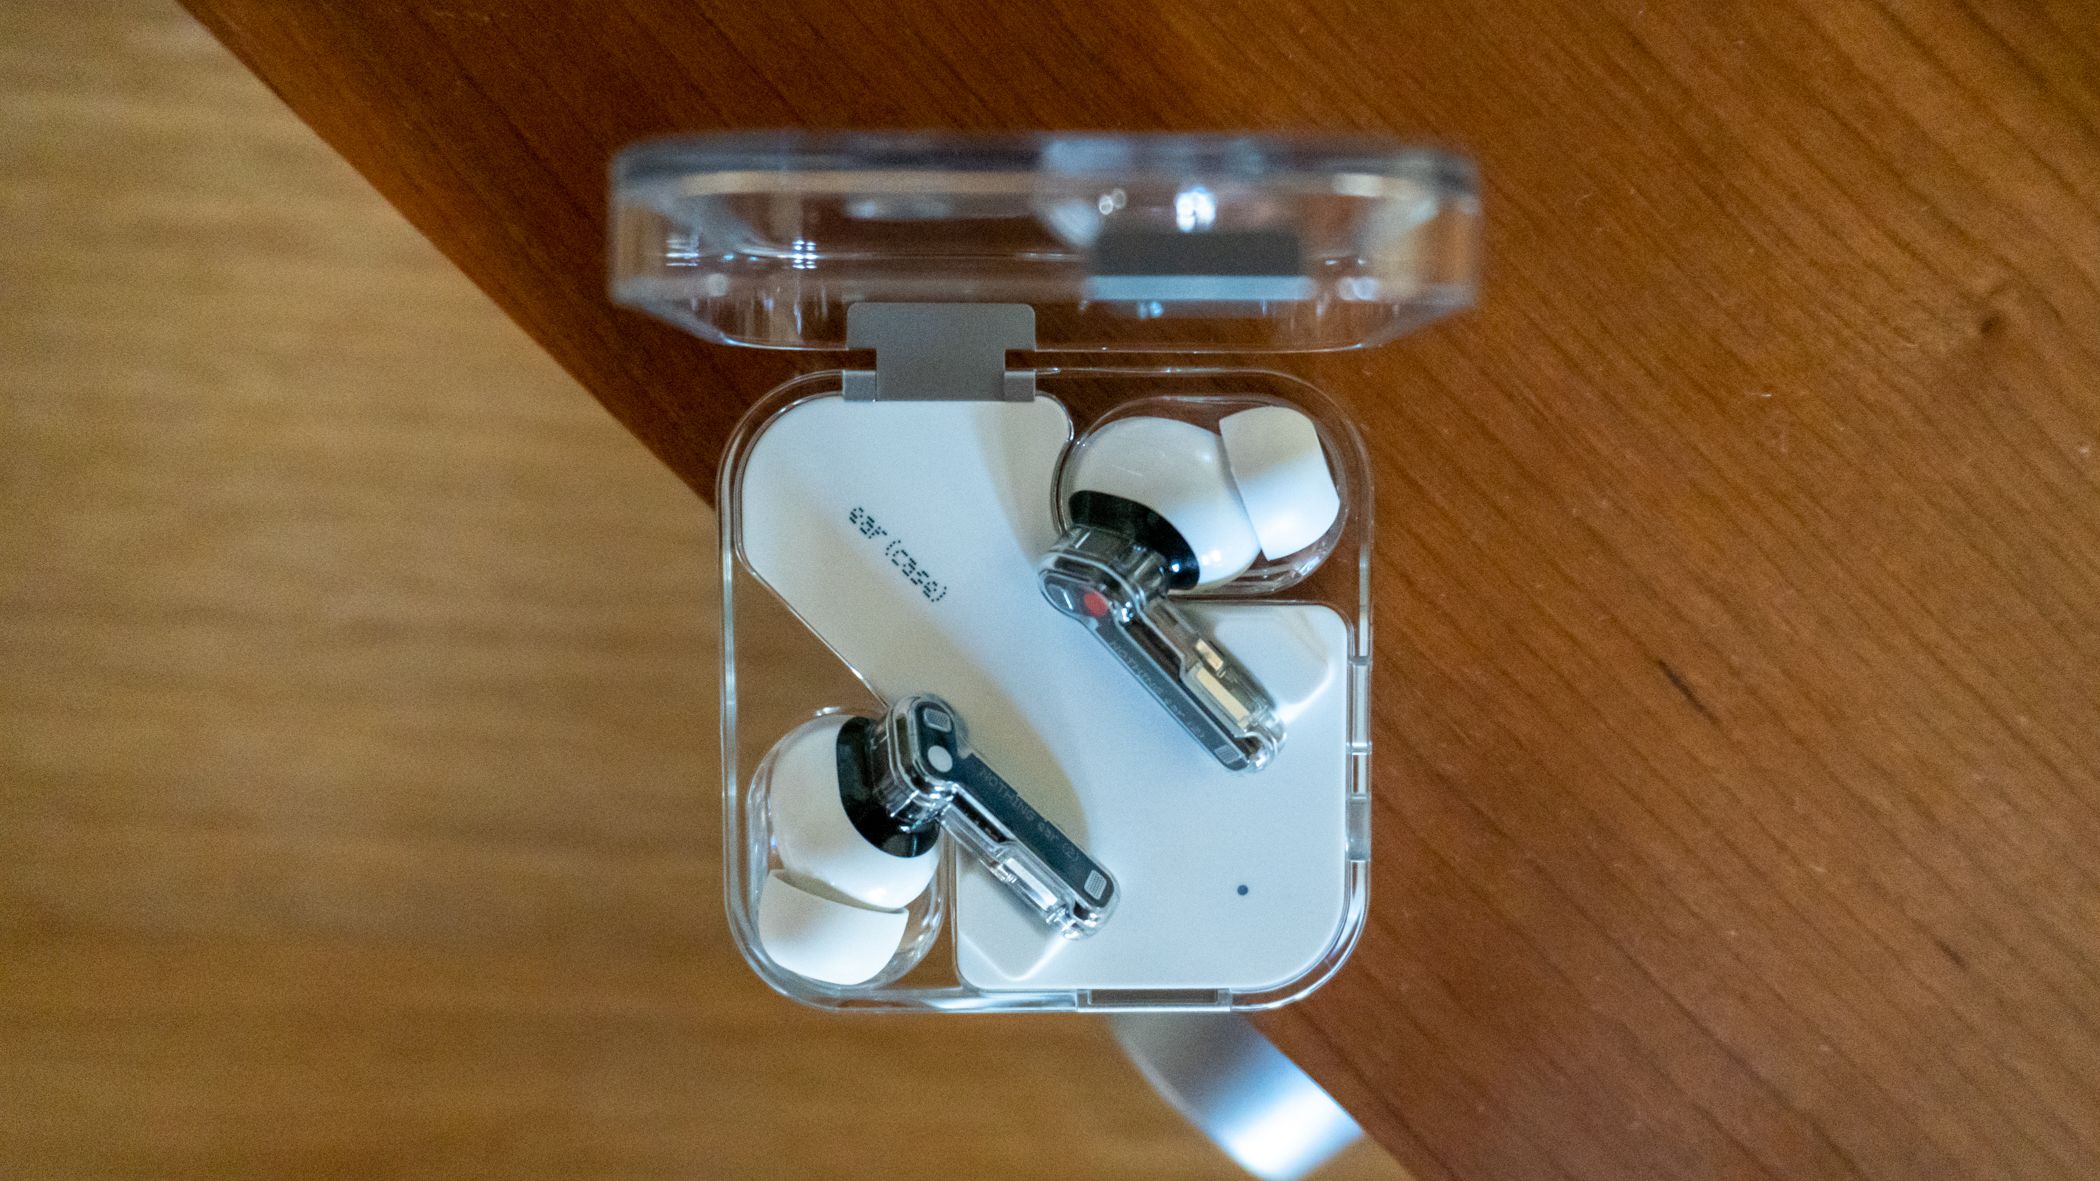 Nothing Ear (stick) Wireless Earbuds Look Good And Sound Great